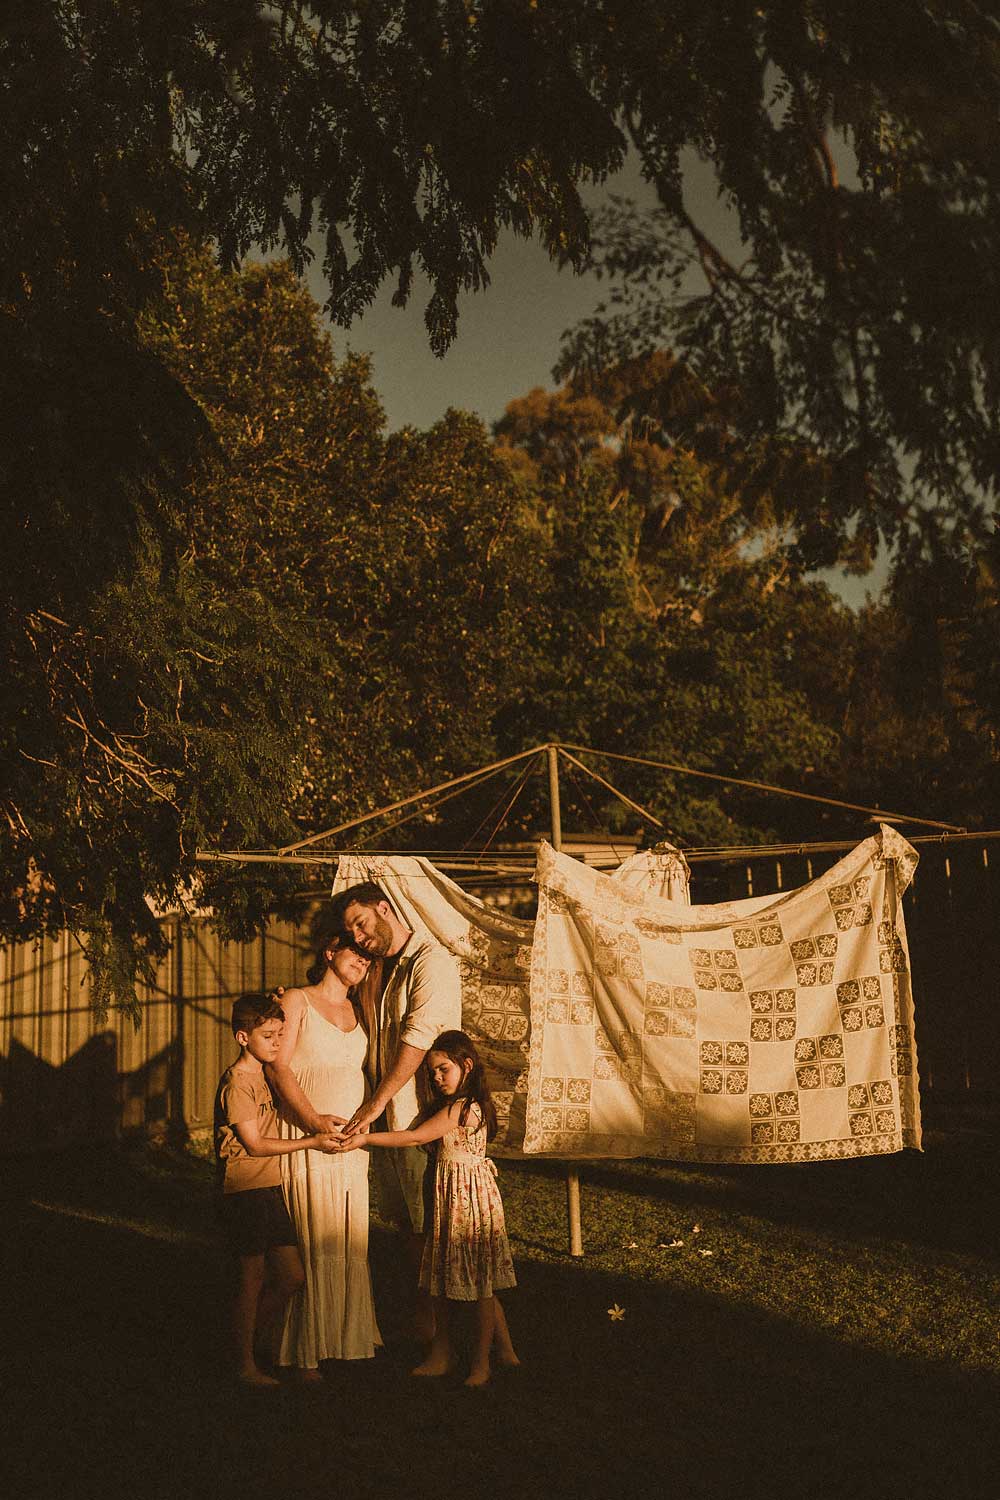 Backyard maternity photos by the clothes line. family cuddling. Sydney